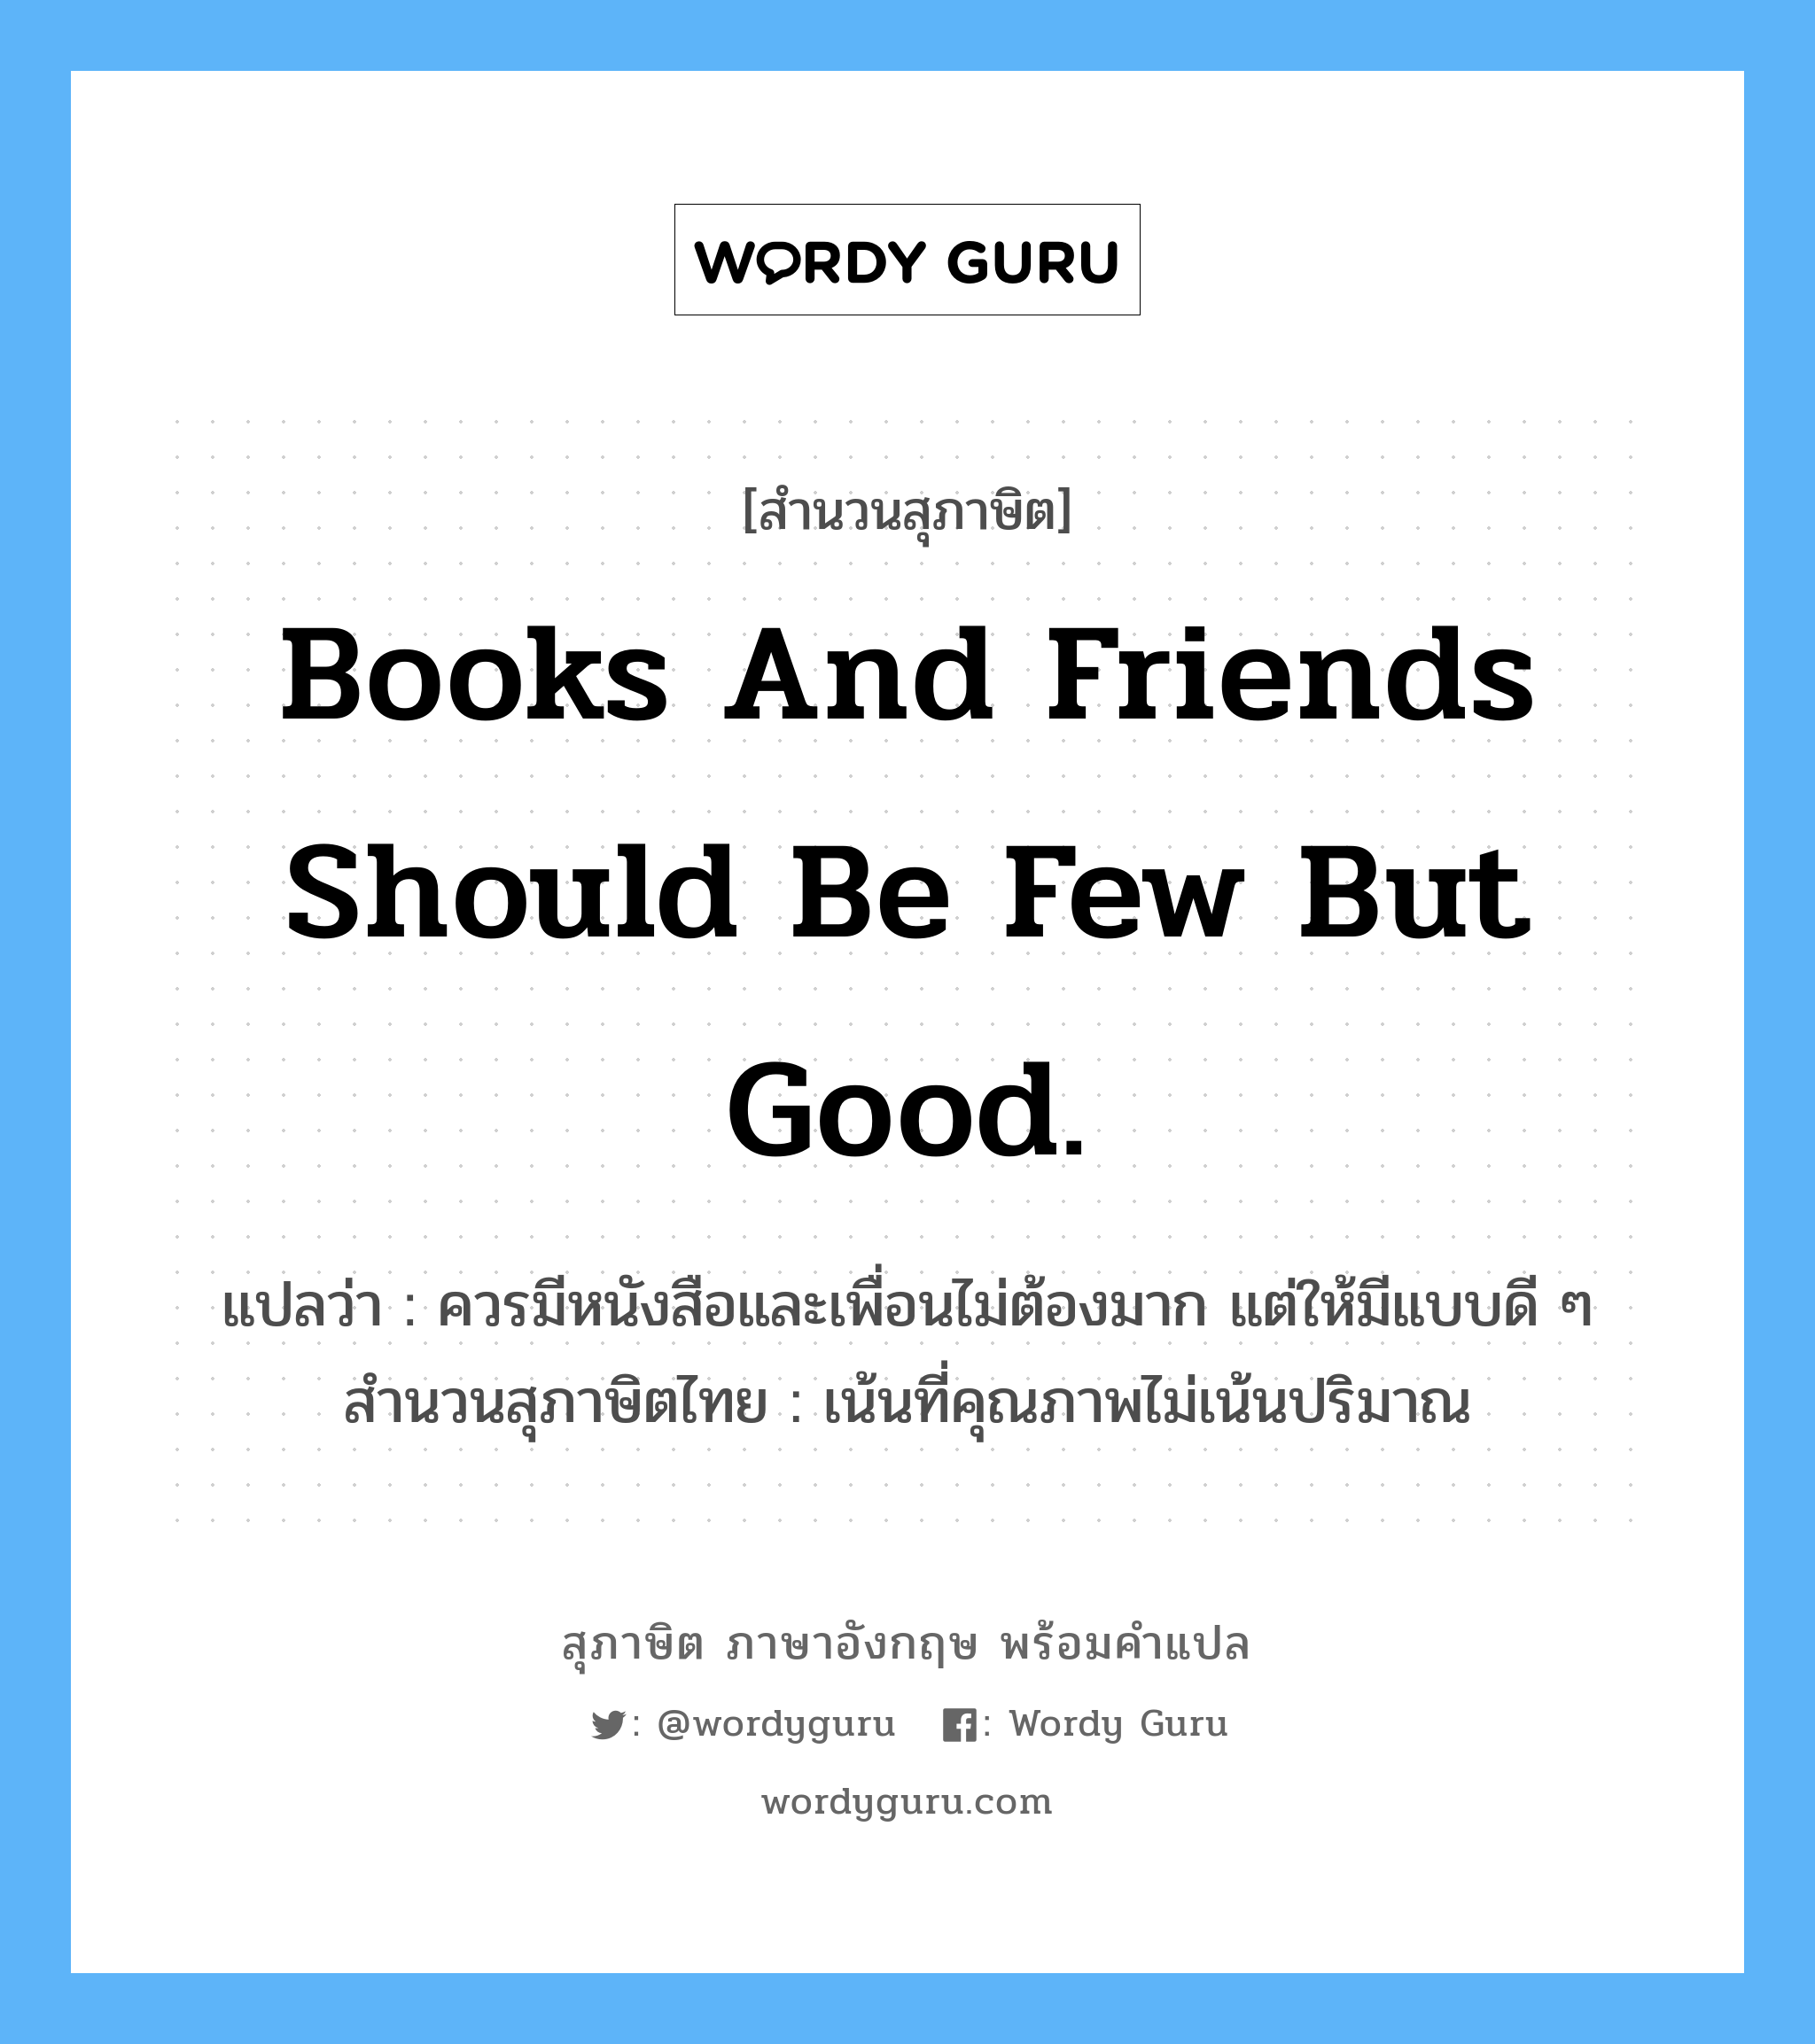 Books and friends should be few but good.